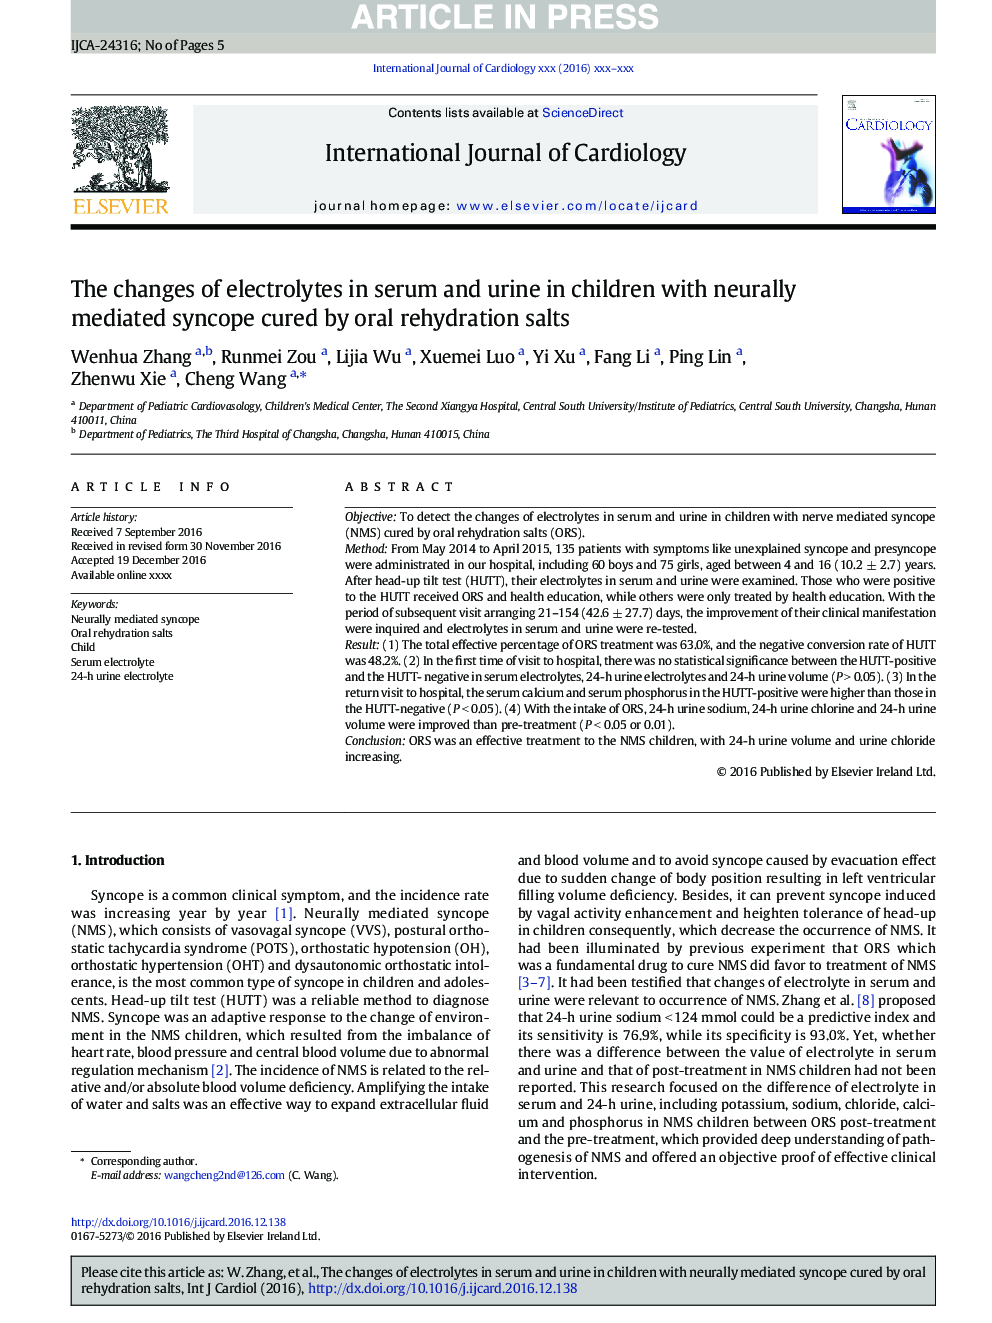 The changes of electrolytes in serum and urine in children with neurally mediated syncope cured by oral rehydration salts